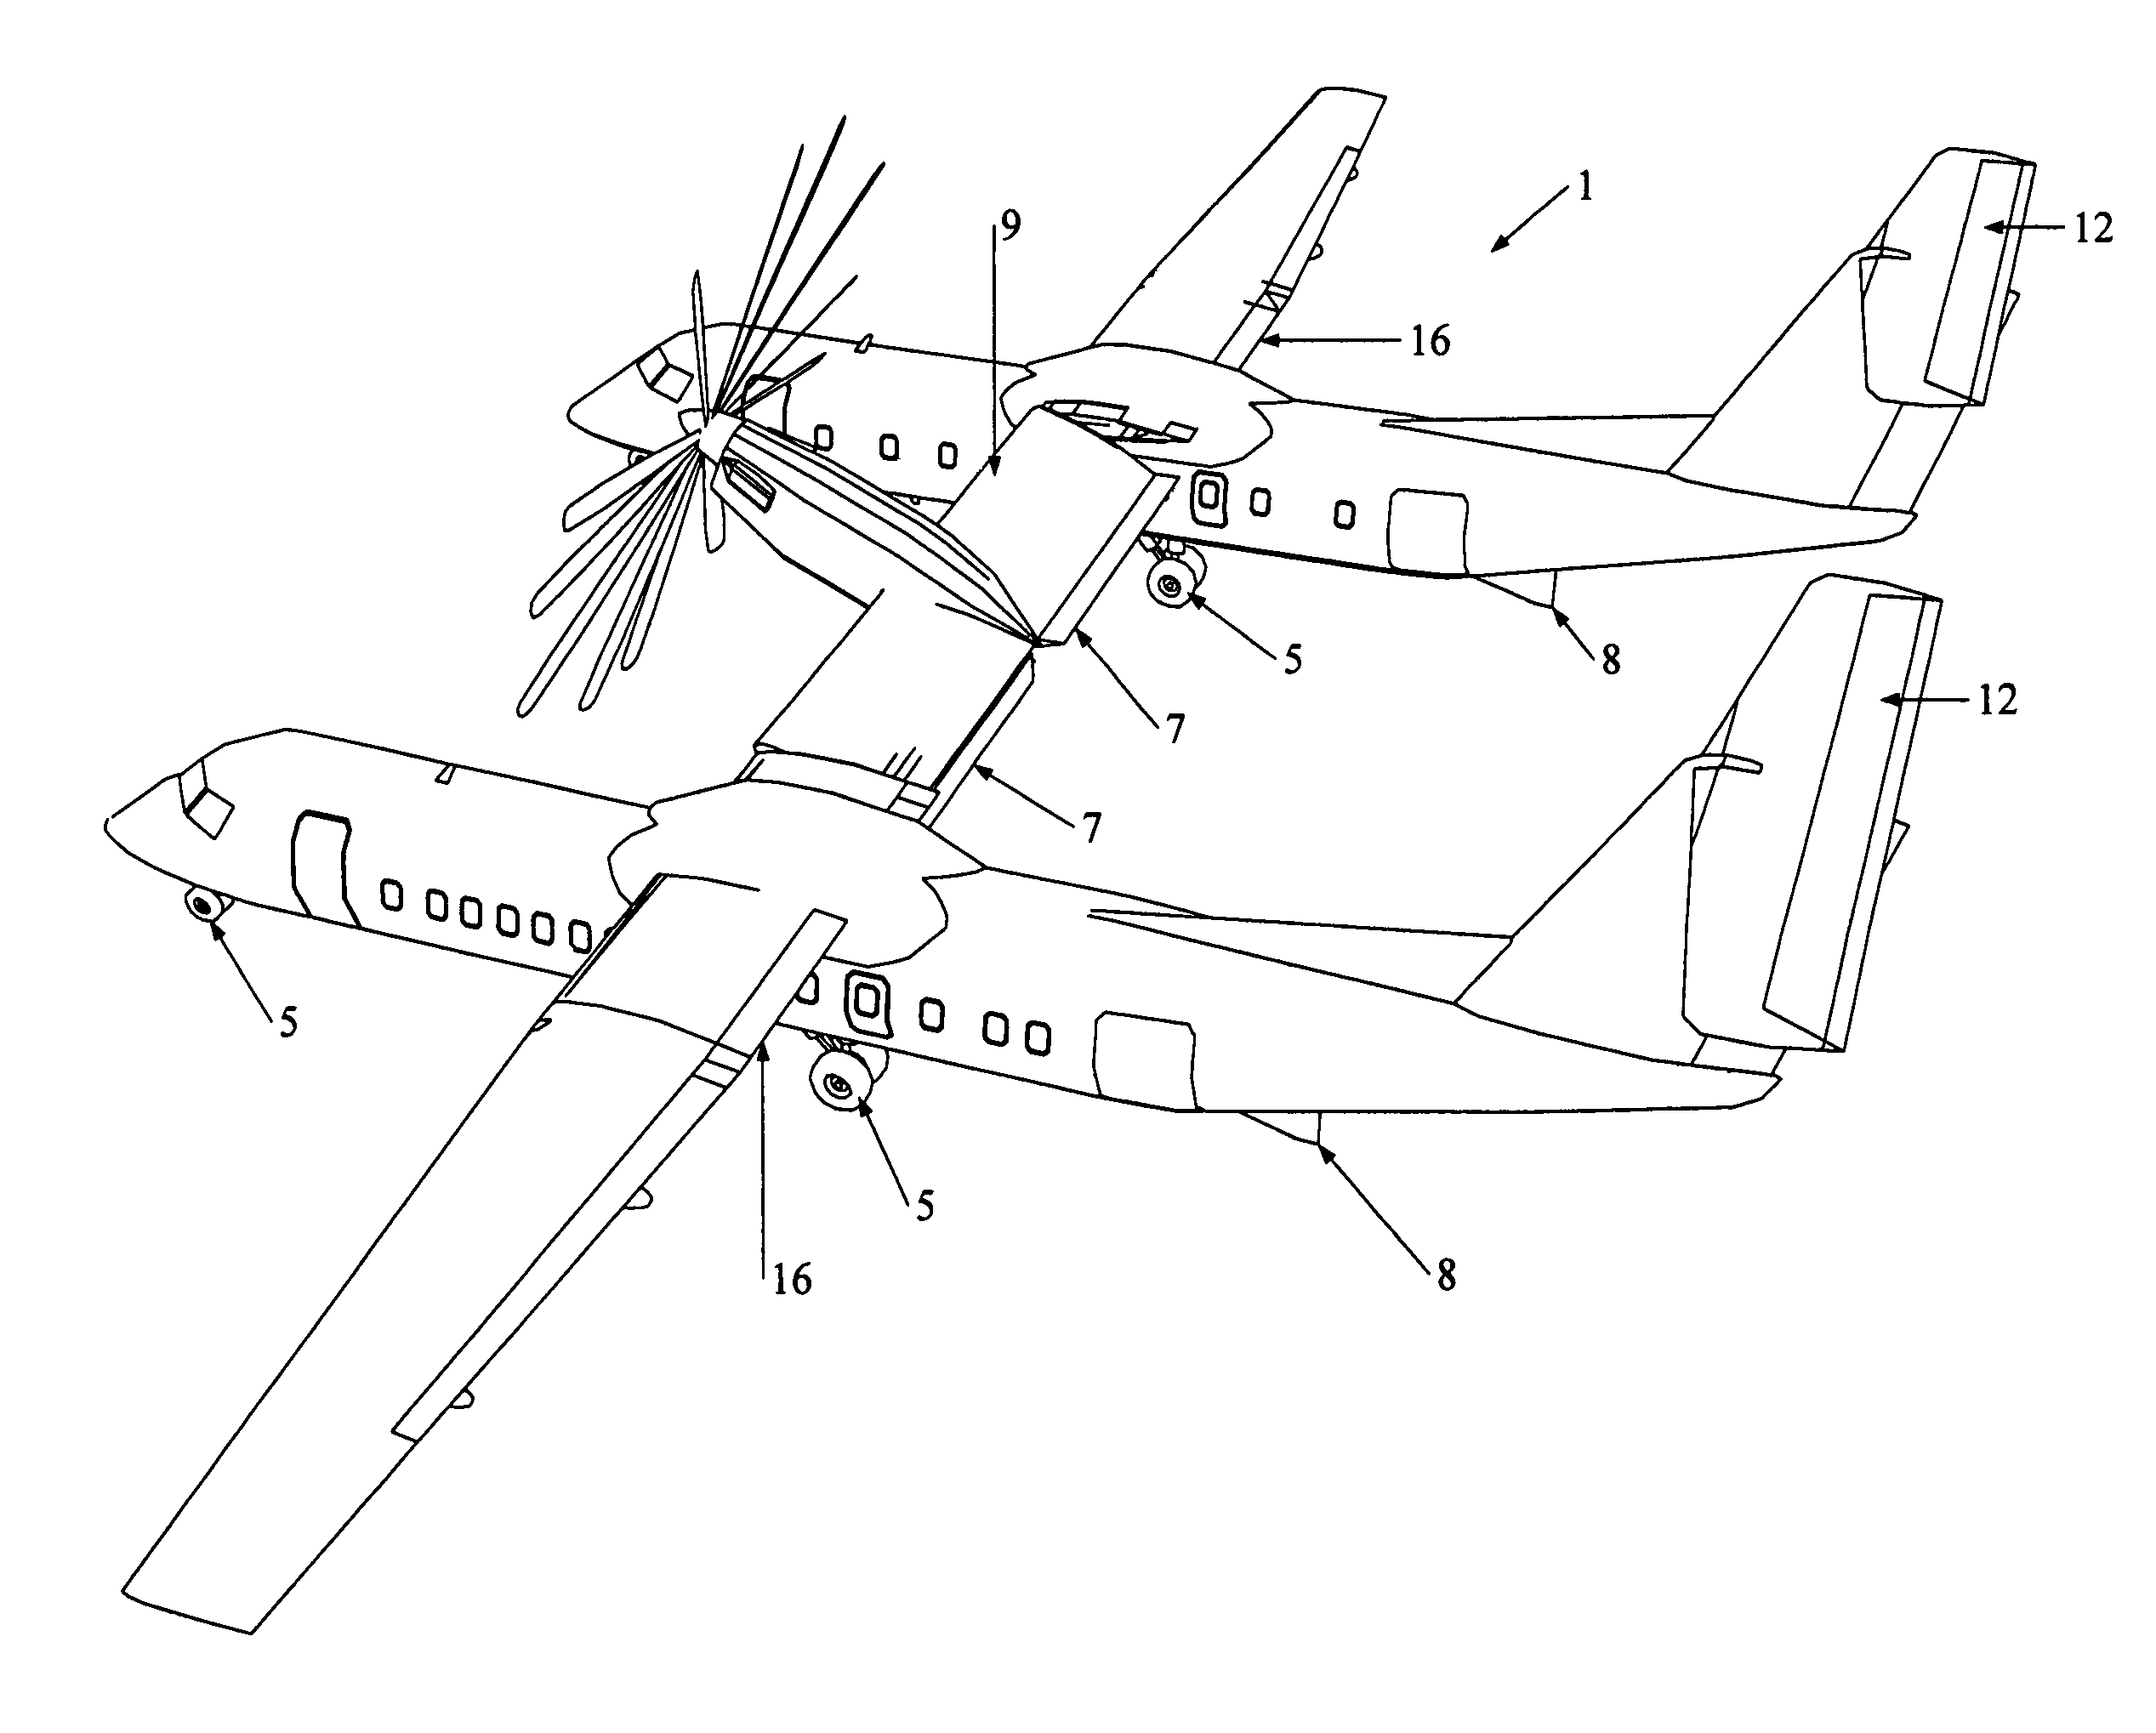 VTOL twin fuselage amphibious aircraft with tilt-center wing, engine and rotor